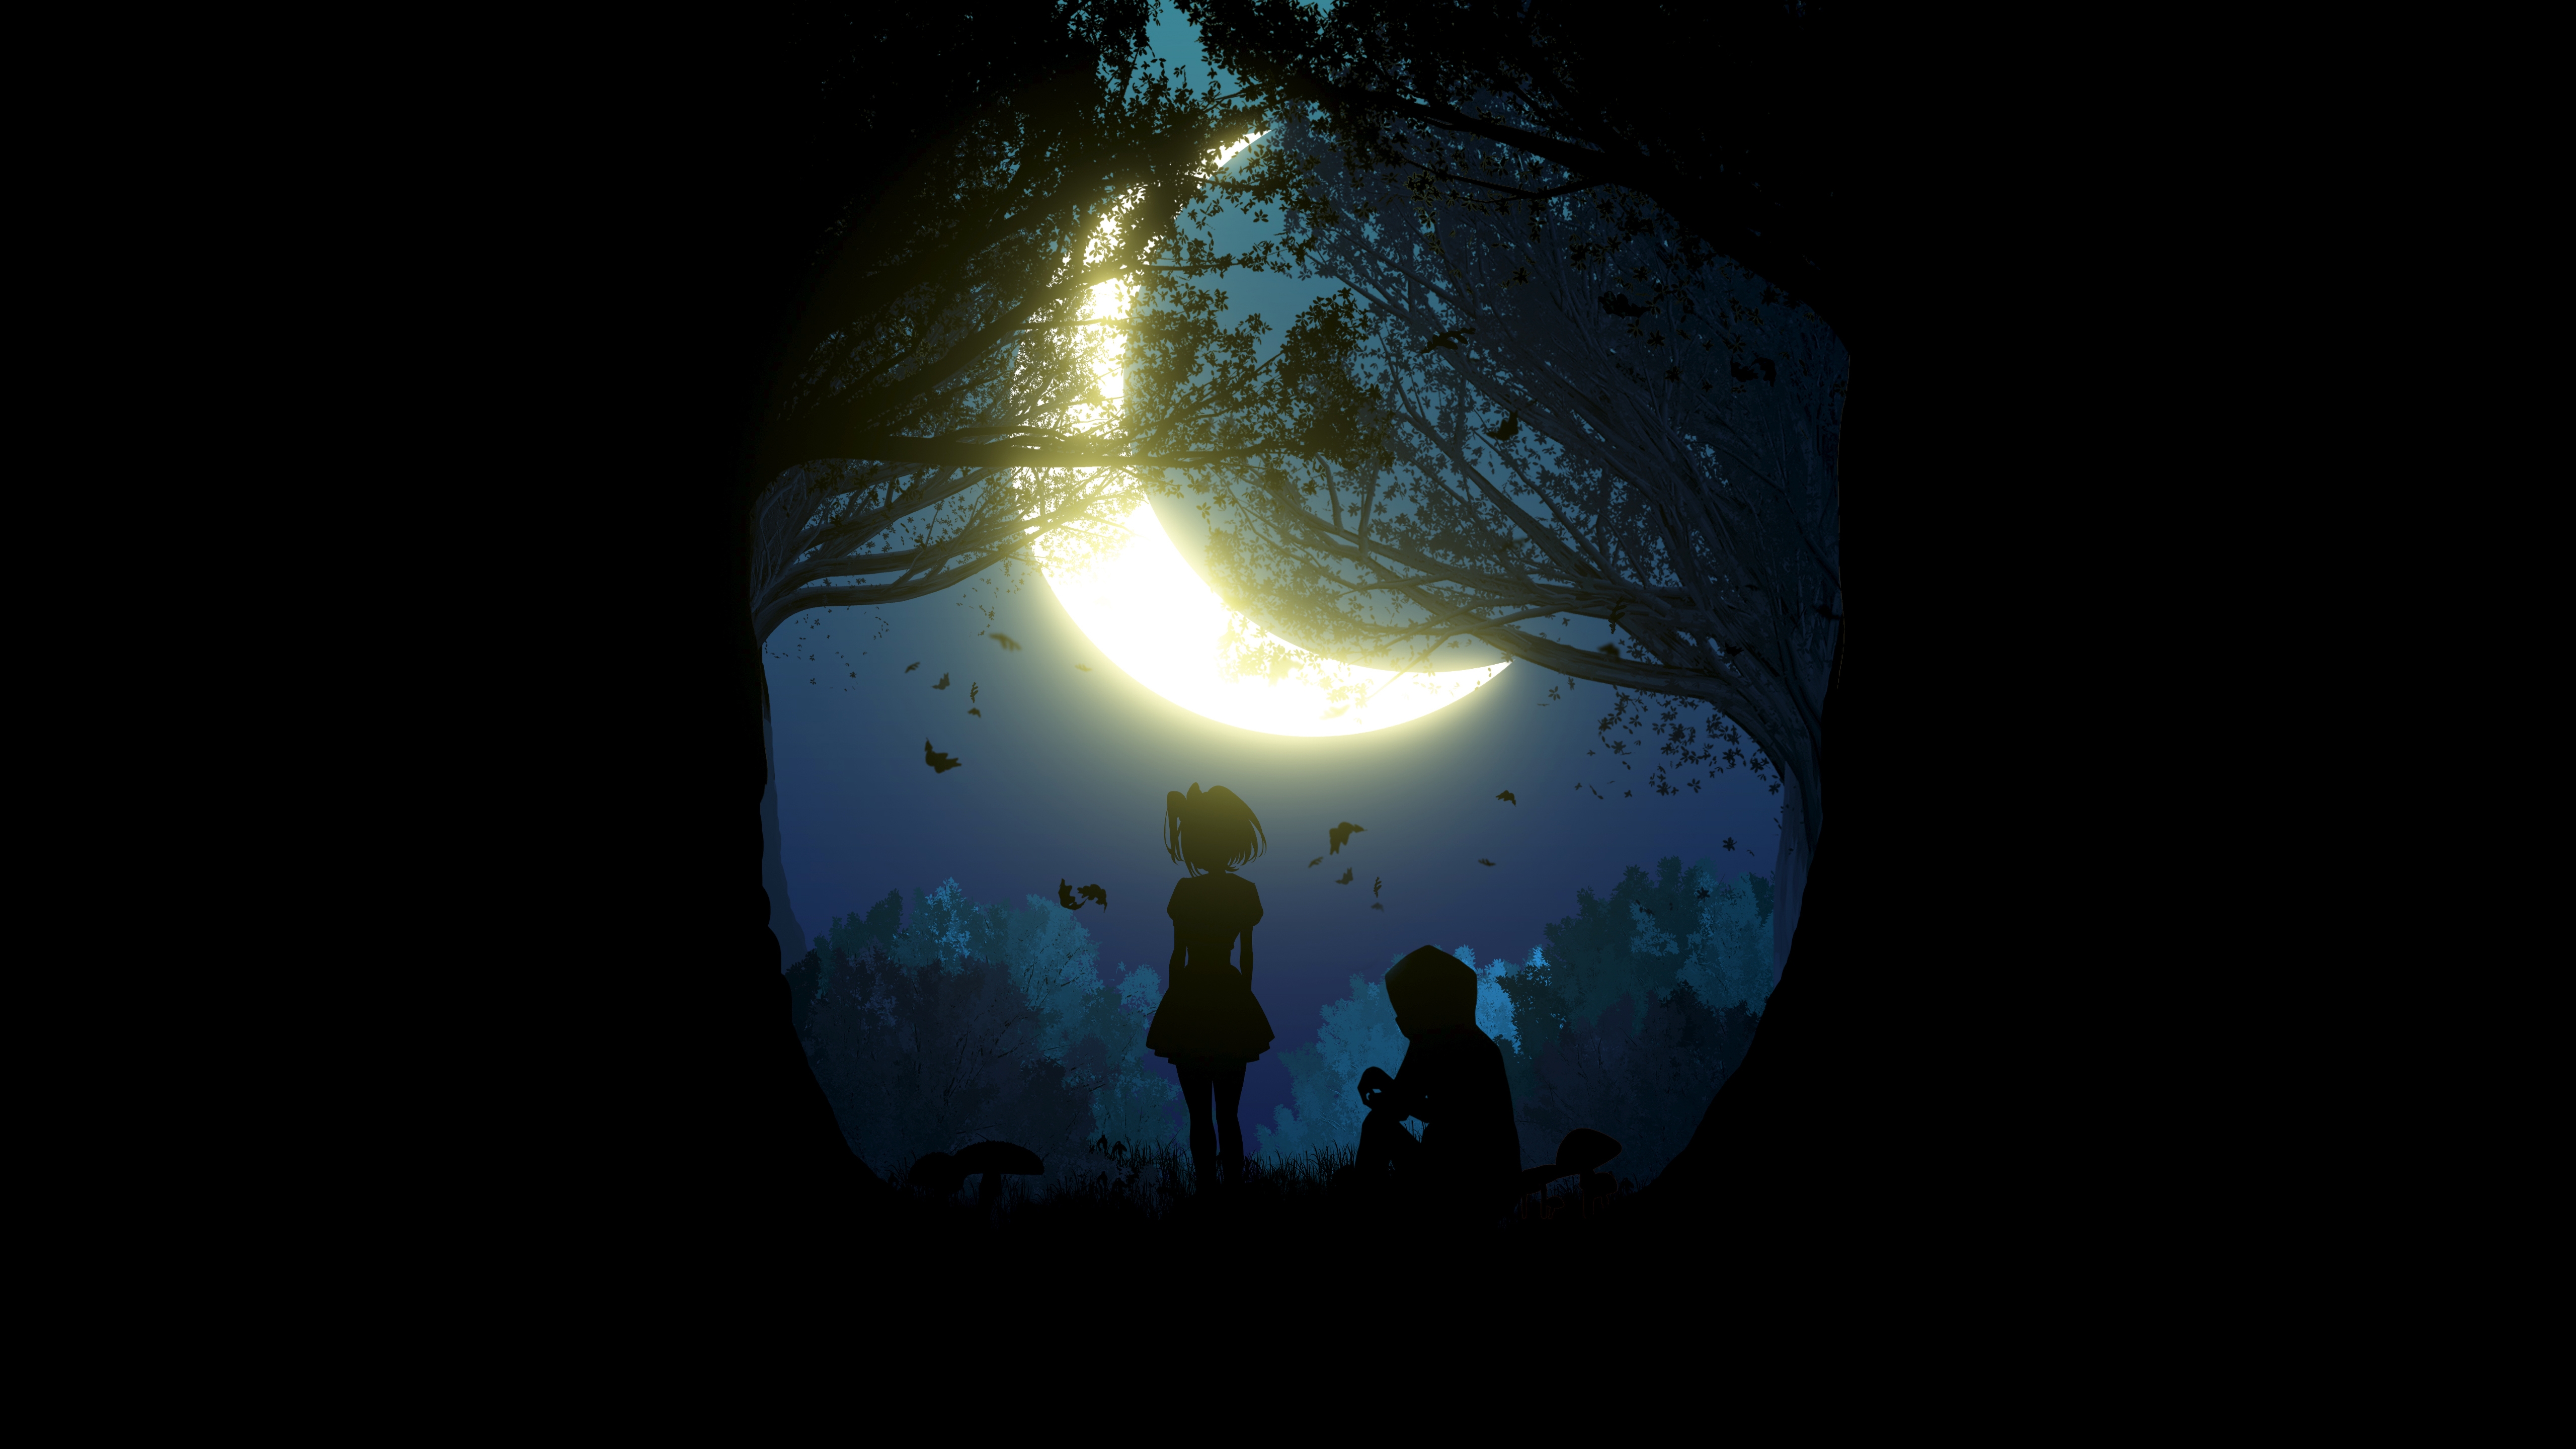 HD wallpaper, 5K, Crescent Moon, Night, Boy, Couple, Girl, Forest, Silhouette, Simple, Black Background